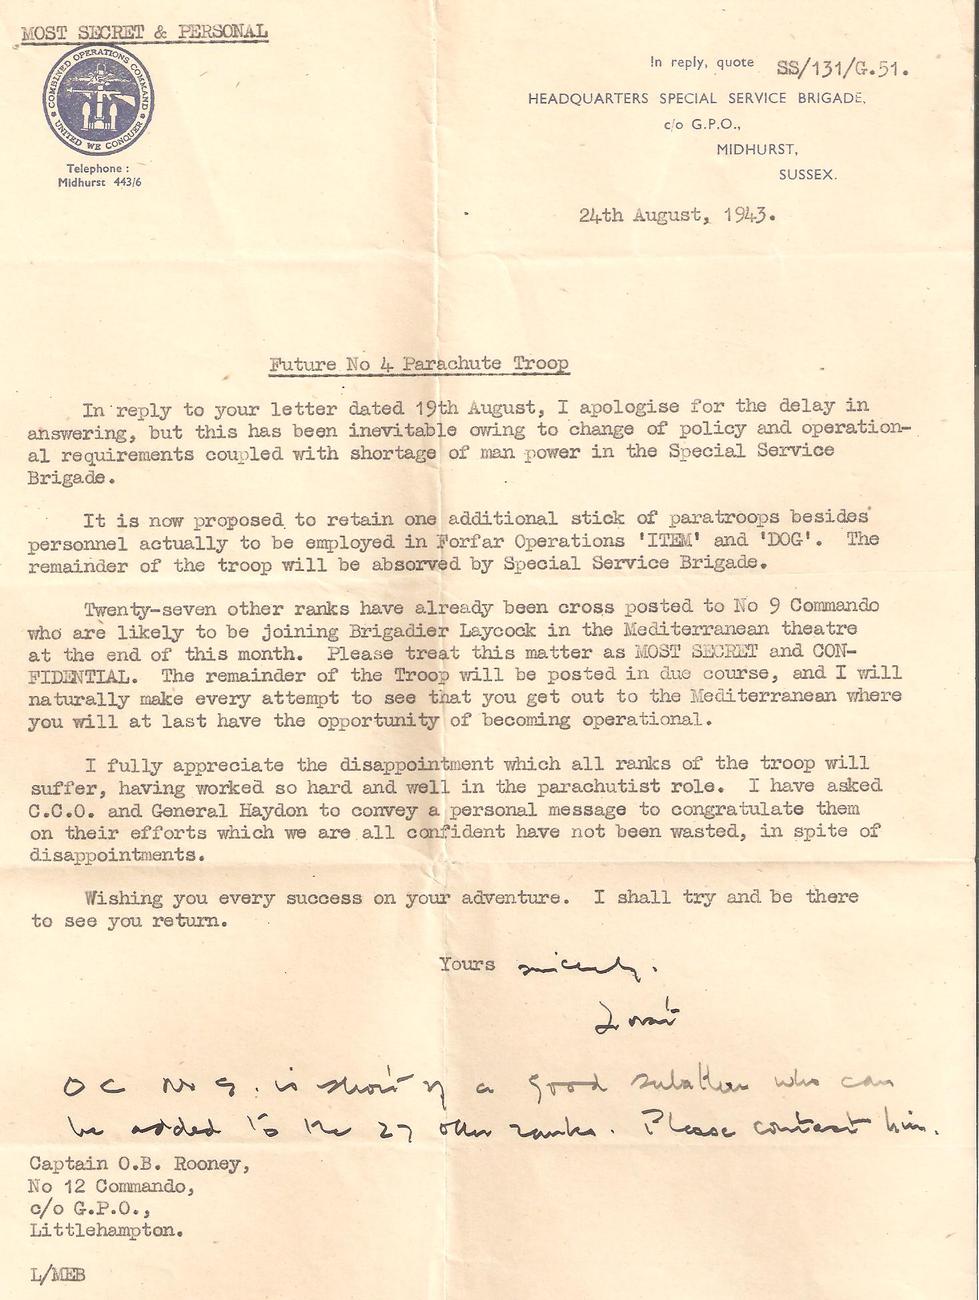 Letter from Lord Lovat to Captain Rooney re the future of 12 Commando